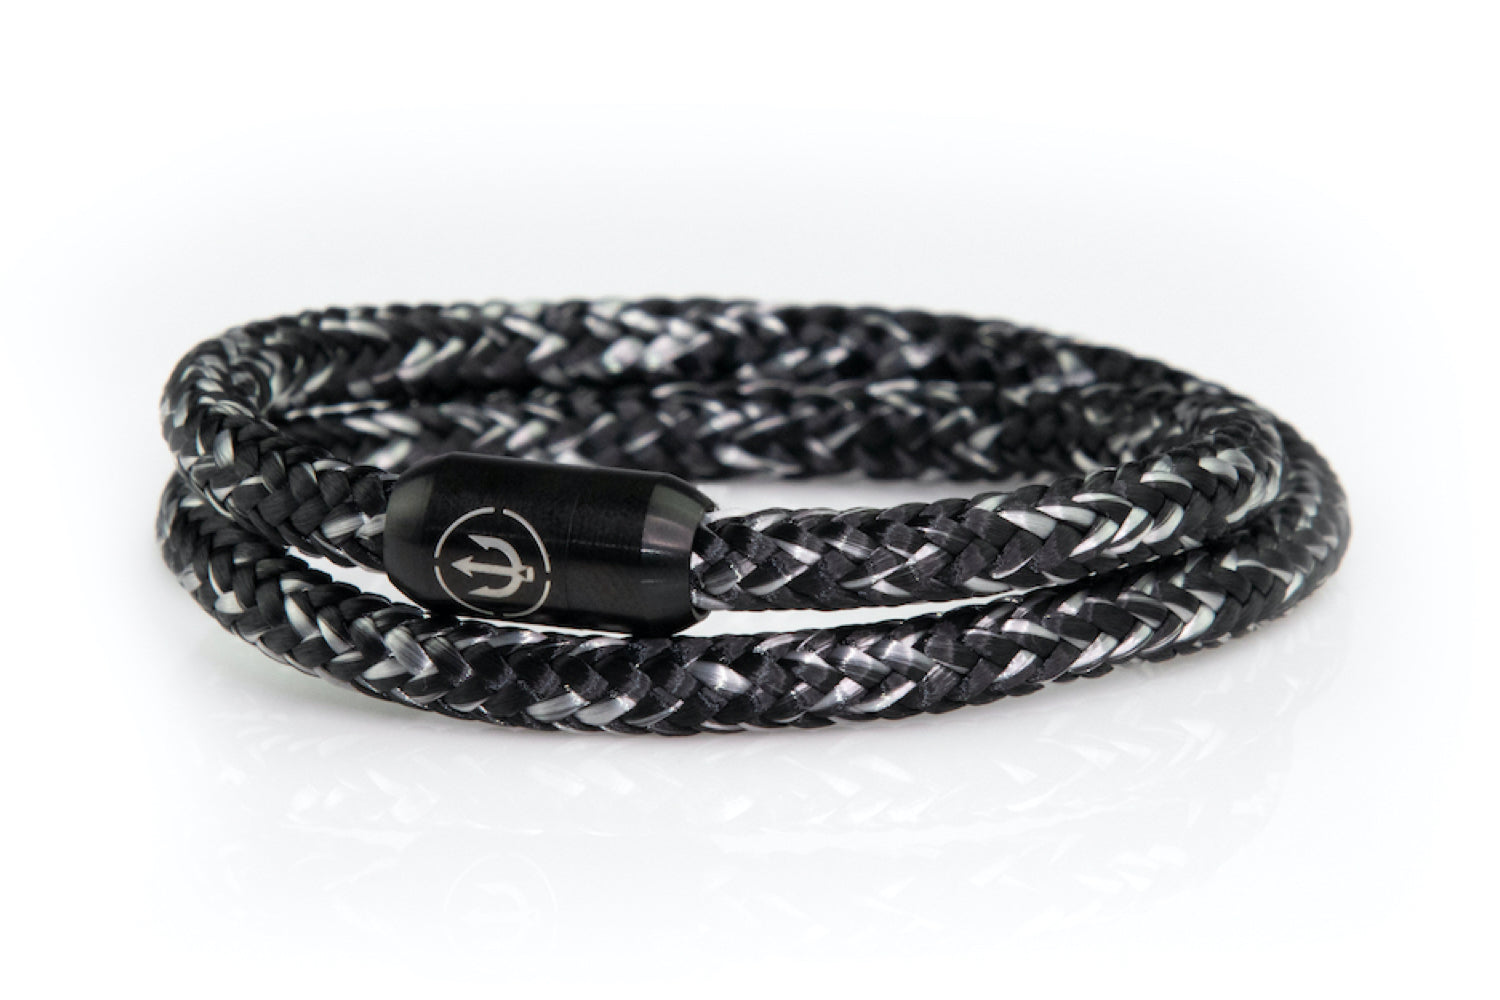 neptn boatswain bracelet with black trident magnetic clasp and seagrass kelp rope